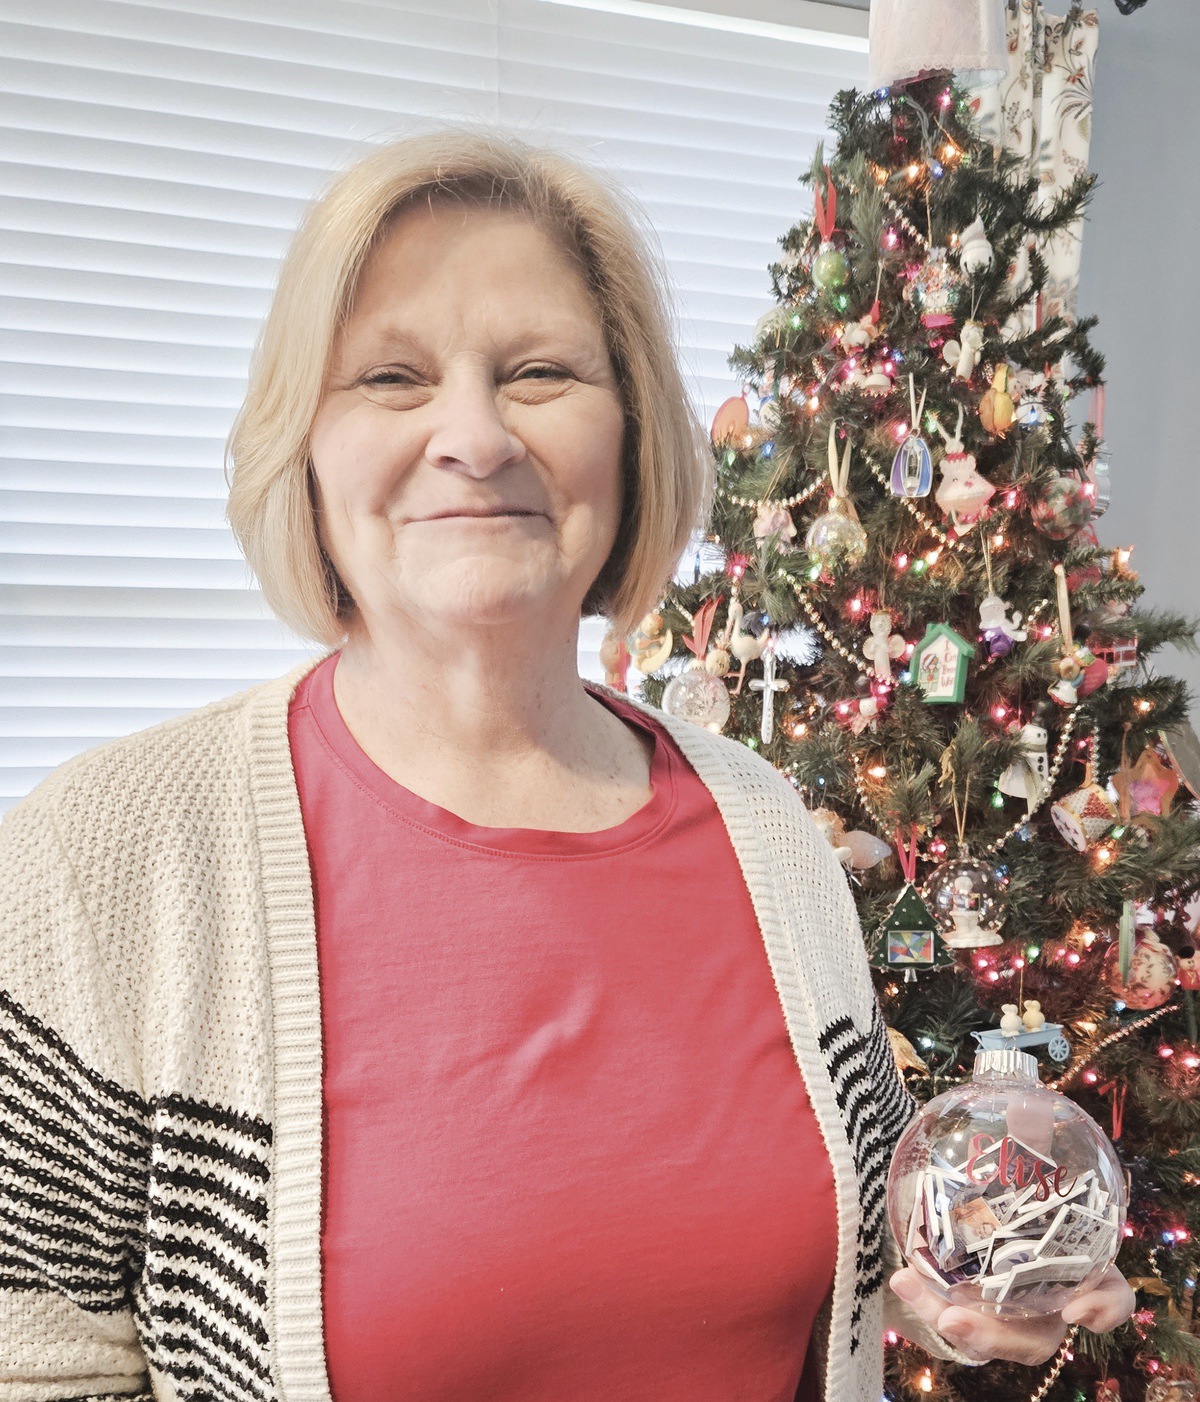 Nedra Reeves holds a keepsake for her granddaughter, Elise, an ornament containing 50 photos of her role in Sun City’s productions of The Sound of Music.